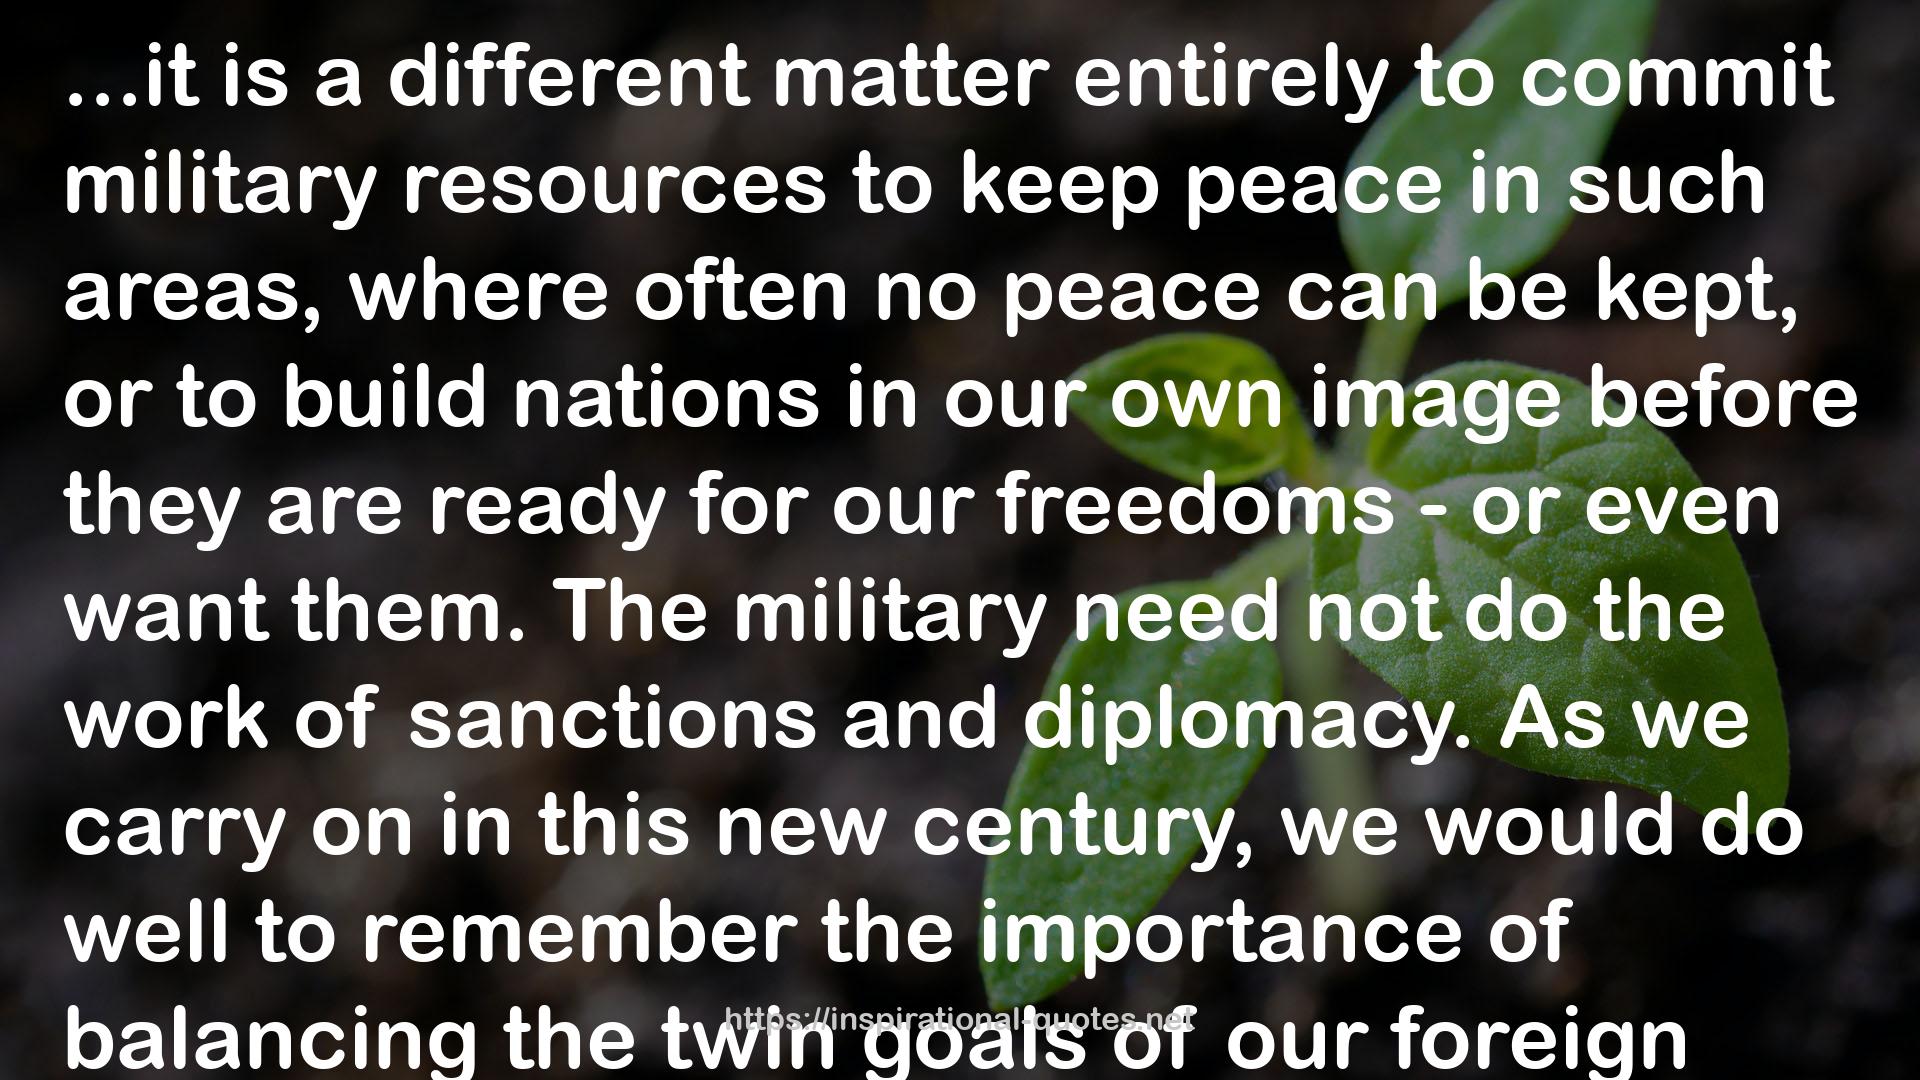 Making War to Keep Peace QUOTES